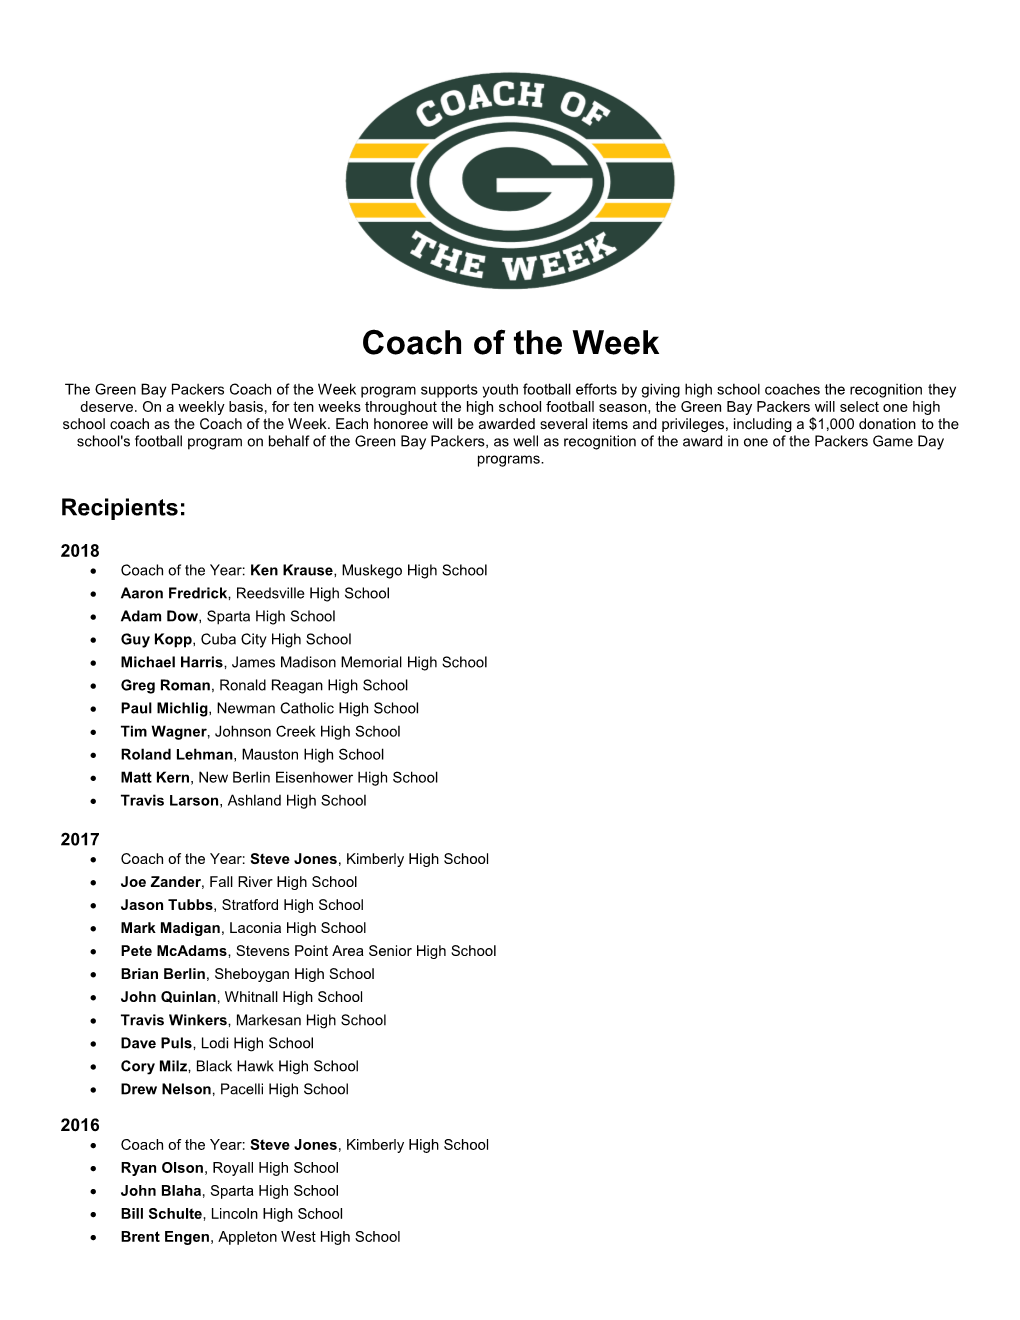 Previous Coach of the Week Recipients